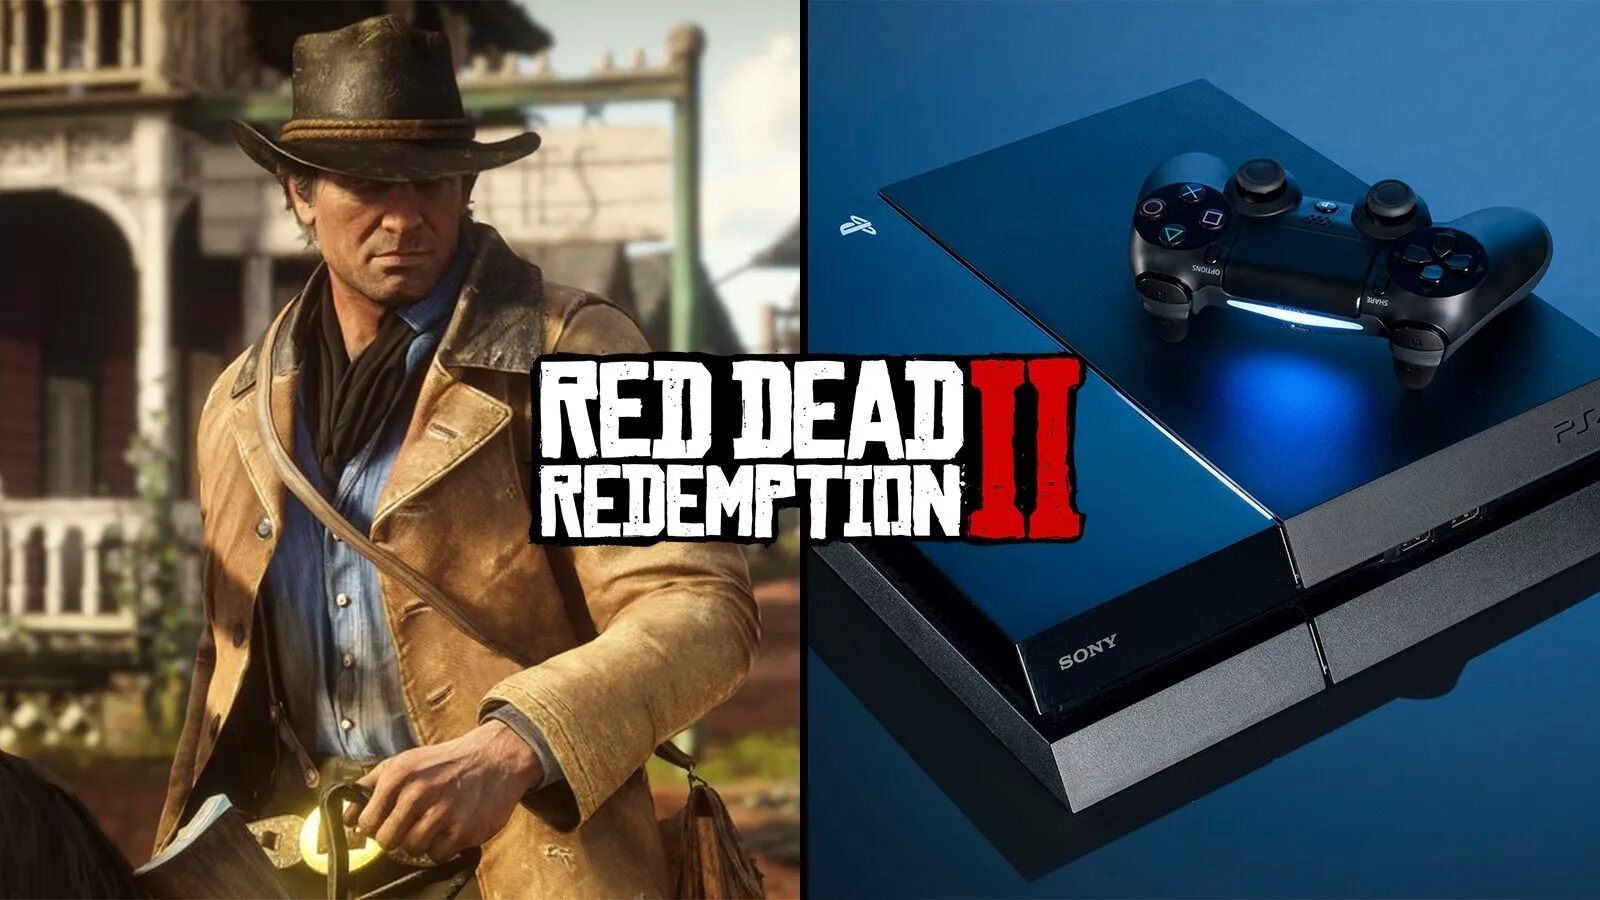 Red redemption 1 ps4. Rdr 2 ps4 диск. Red Dead 2 ps4. Red Dead Redemption 2 диск пс4. Sony PLAYSTATION 4 Slim Red Dead Redemption 2.